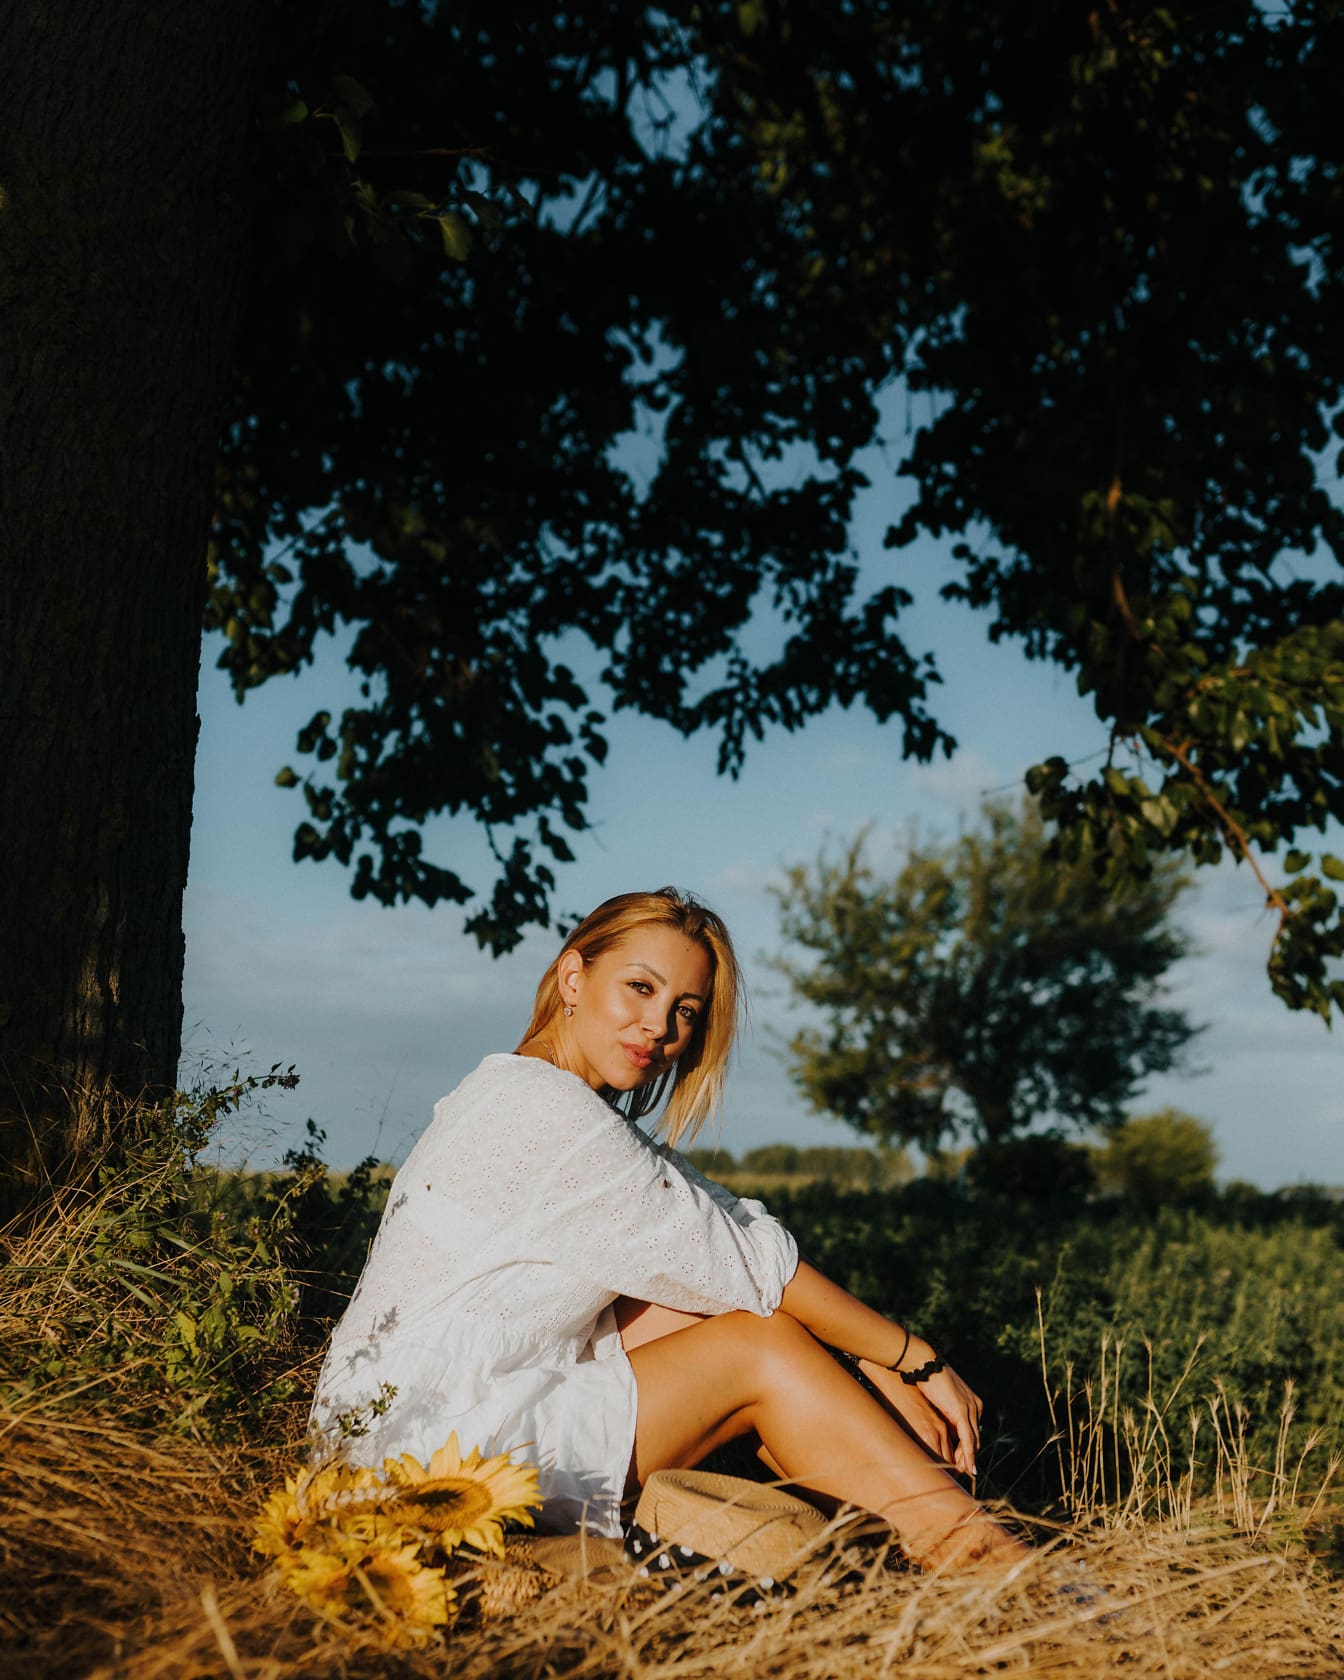 Gorgeous blonde photo model sitting in countryside